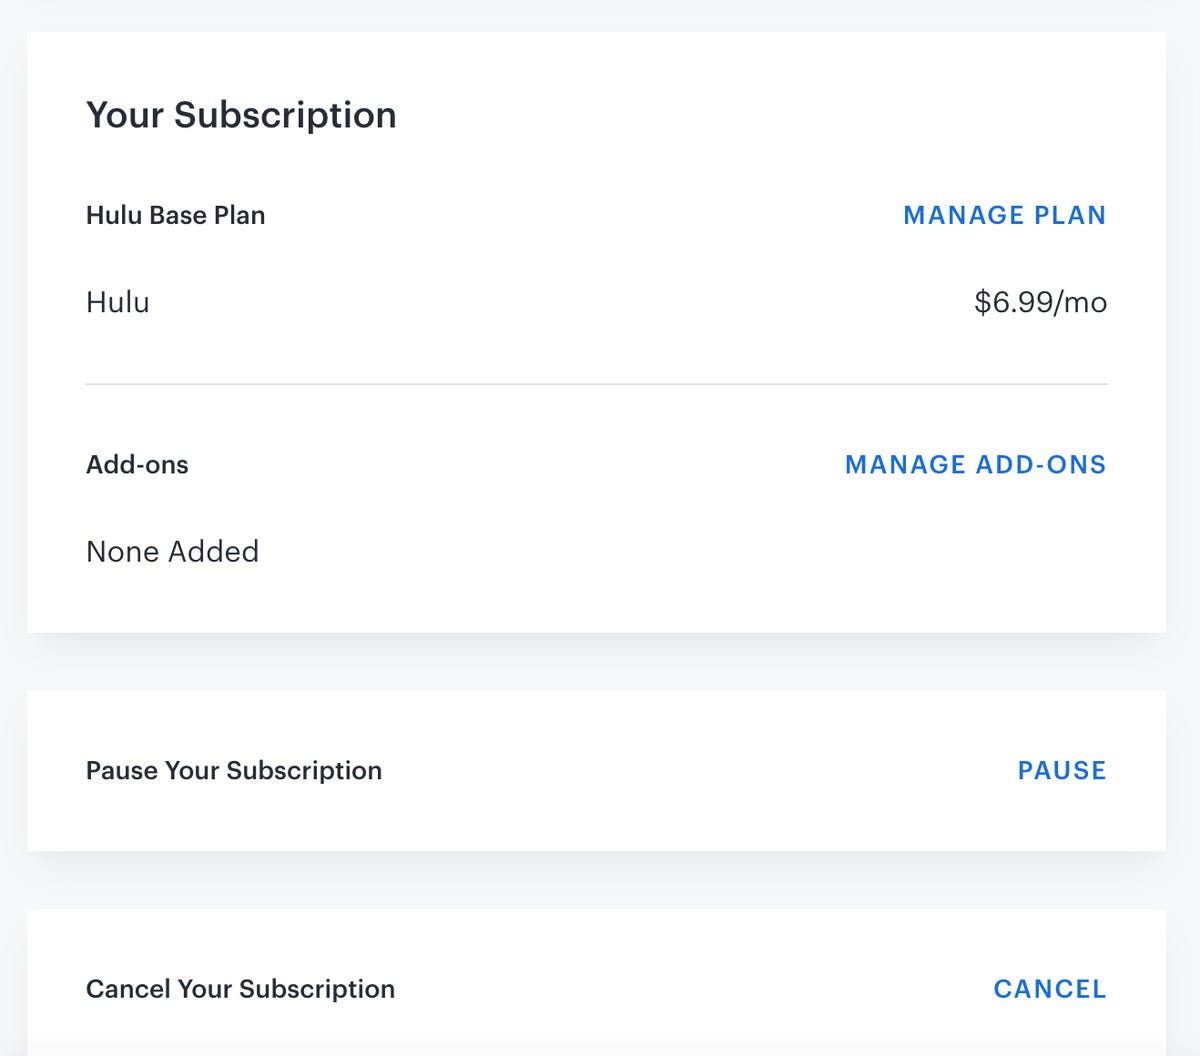 a screen showing the current Hulu subscription with a button letting the user "manage plan."